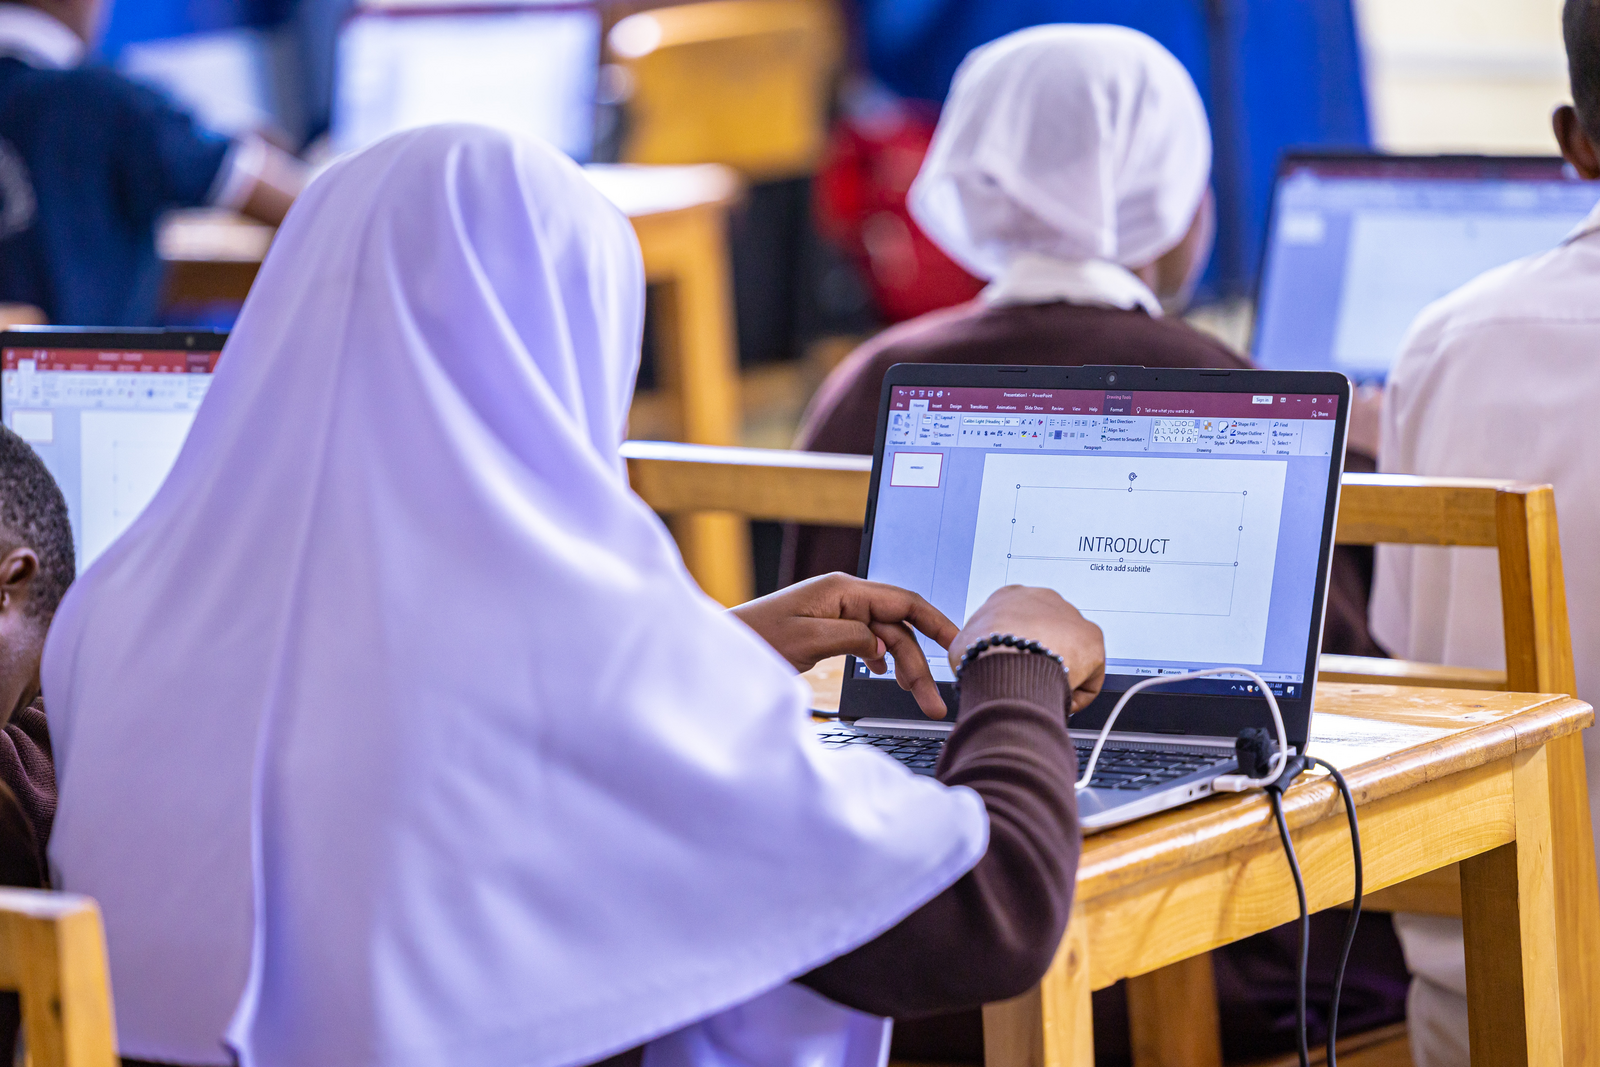 A girl uses a laptop during a lesson in the Skills for Their Future programme.